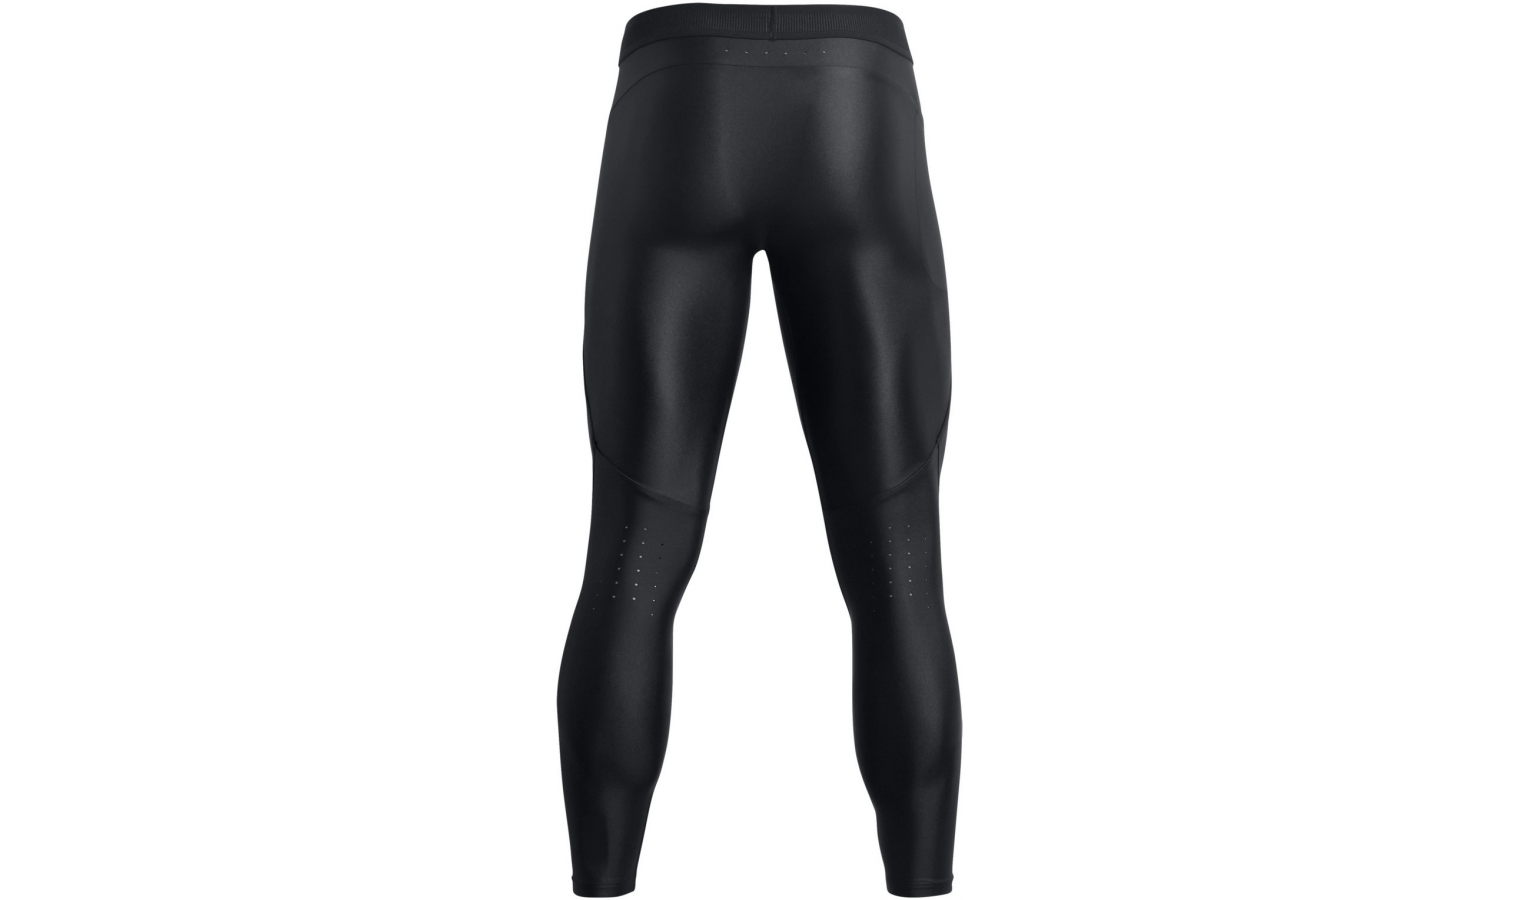 Mens compression 7/8 leggings Under Armour UA HG ISOCHILL PERF